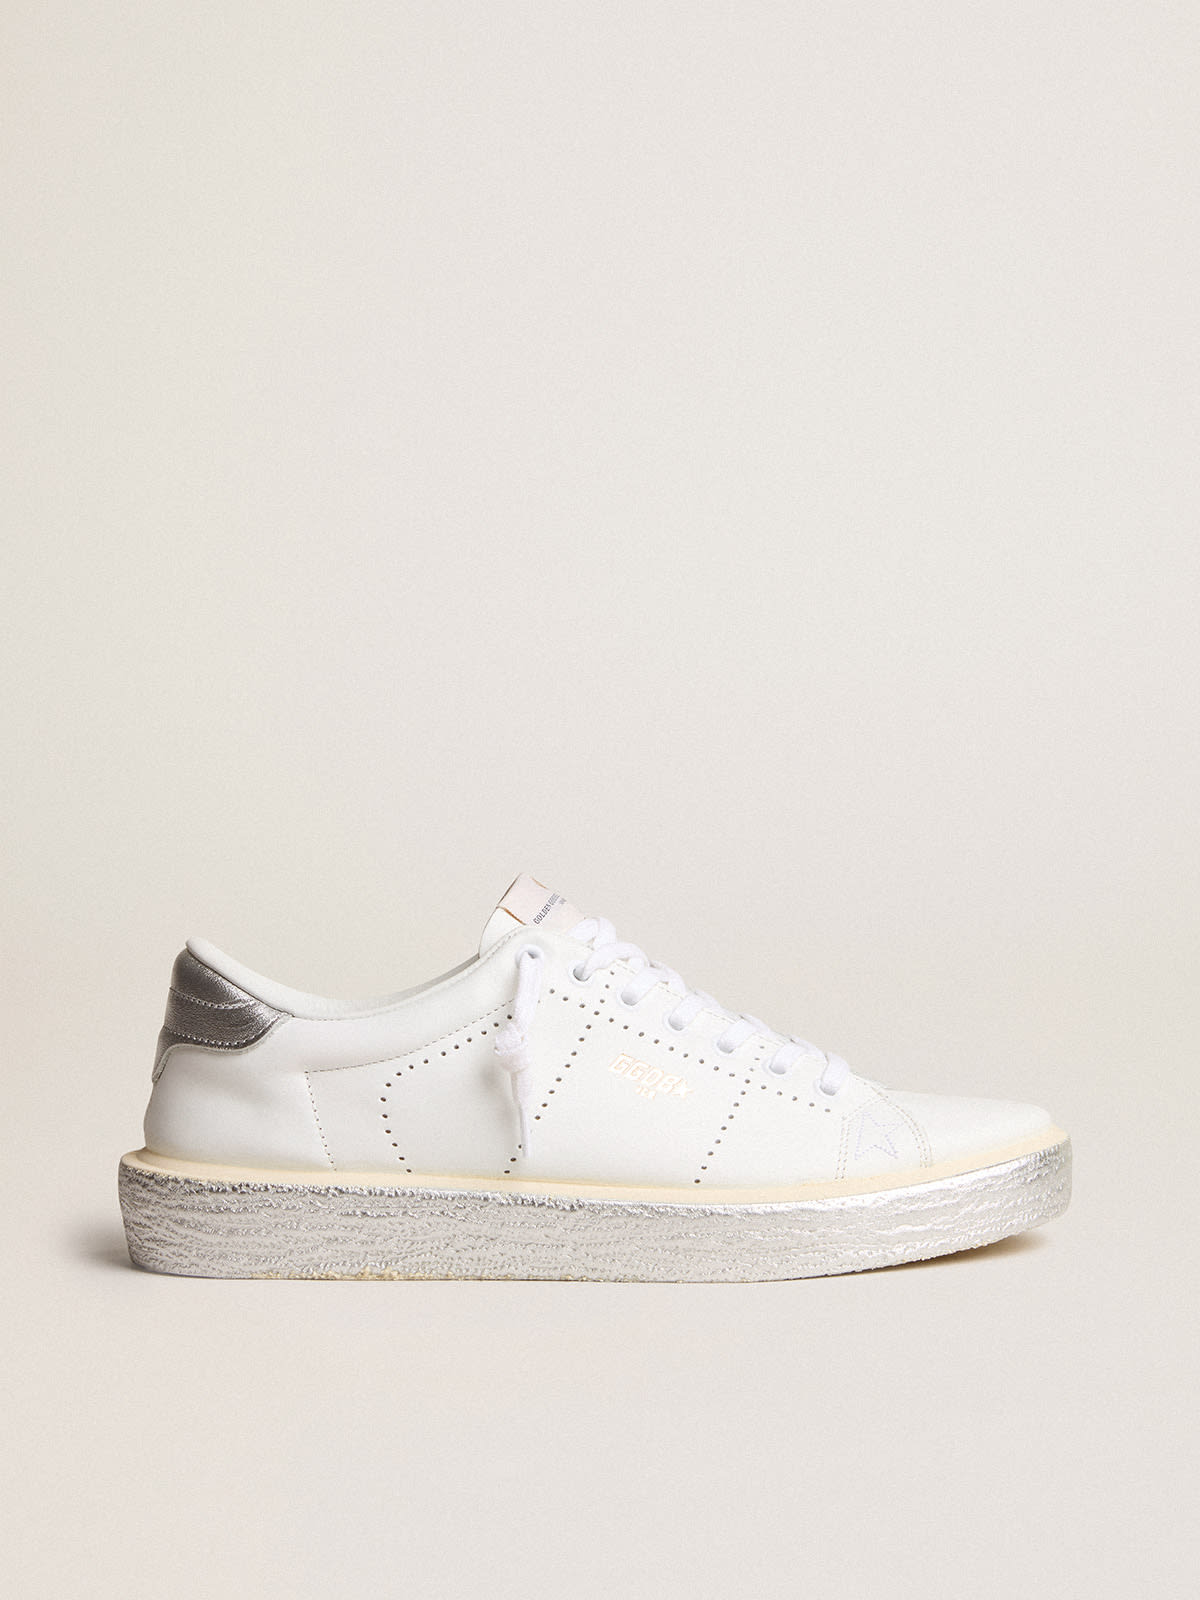 TENNIS LEATHER UPPER LAMINATED HEEL AND SOLE WHITE/SILVER | Golden Goose